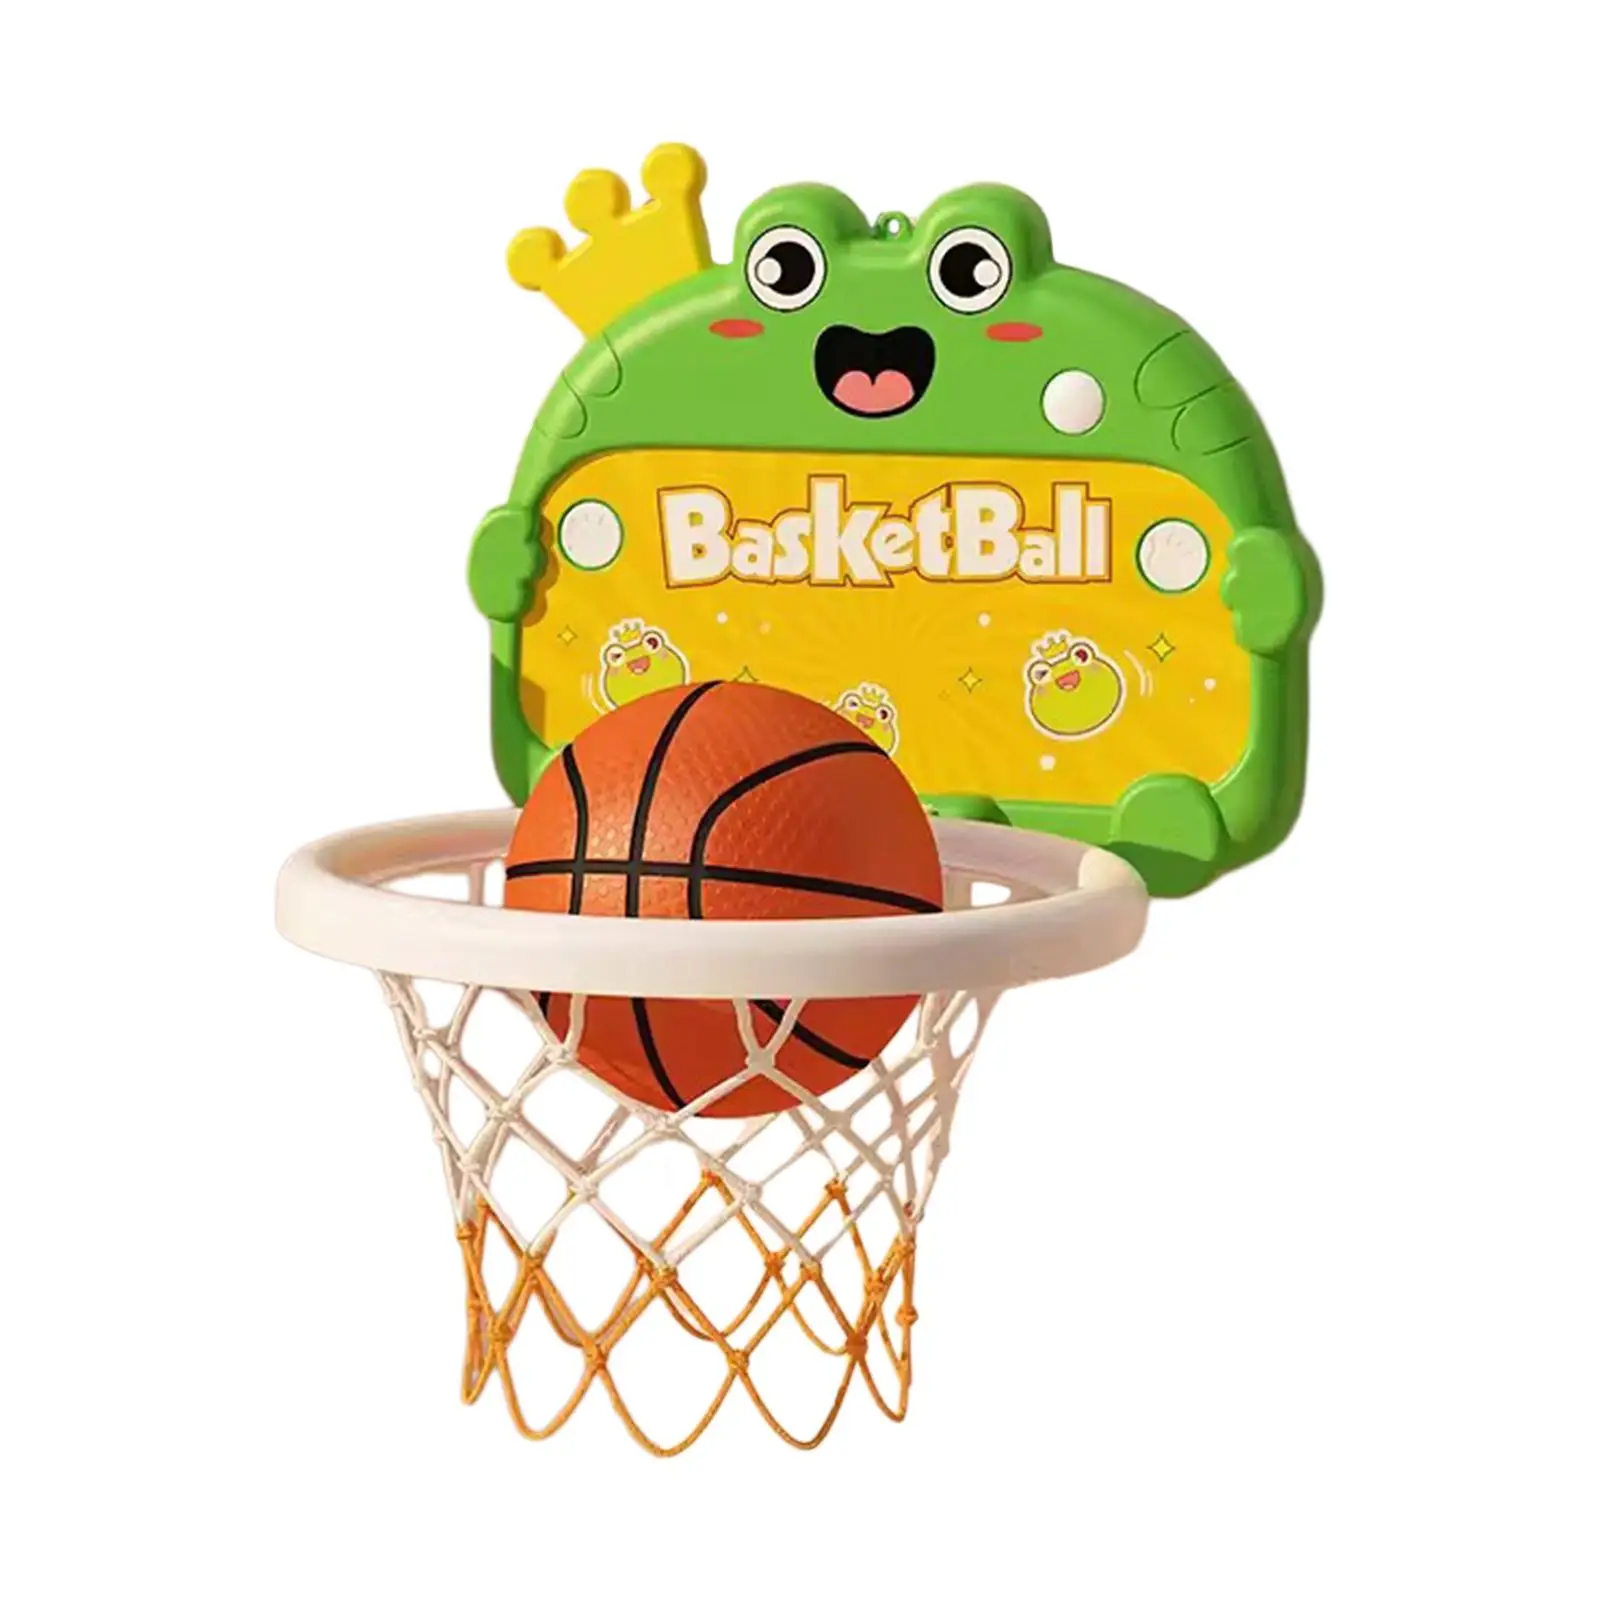 Mini Basketball Hoop Set Family Games Activity Centers, Educational Basketball Toys for Living Room Door